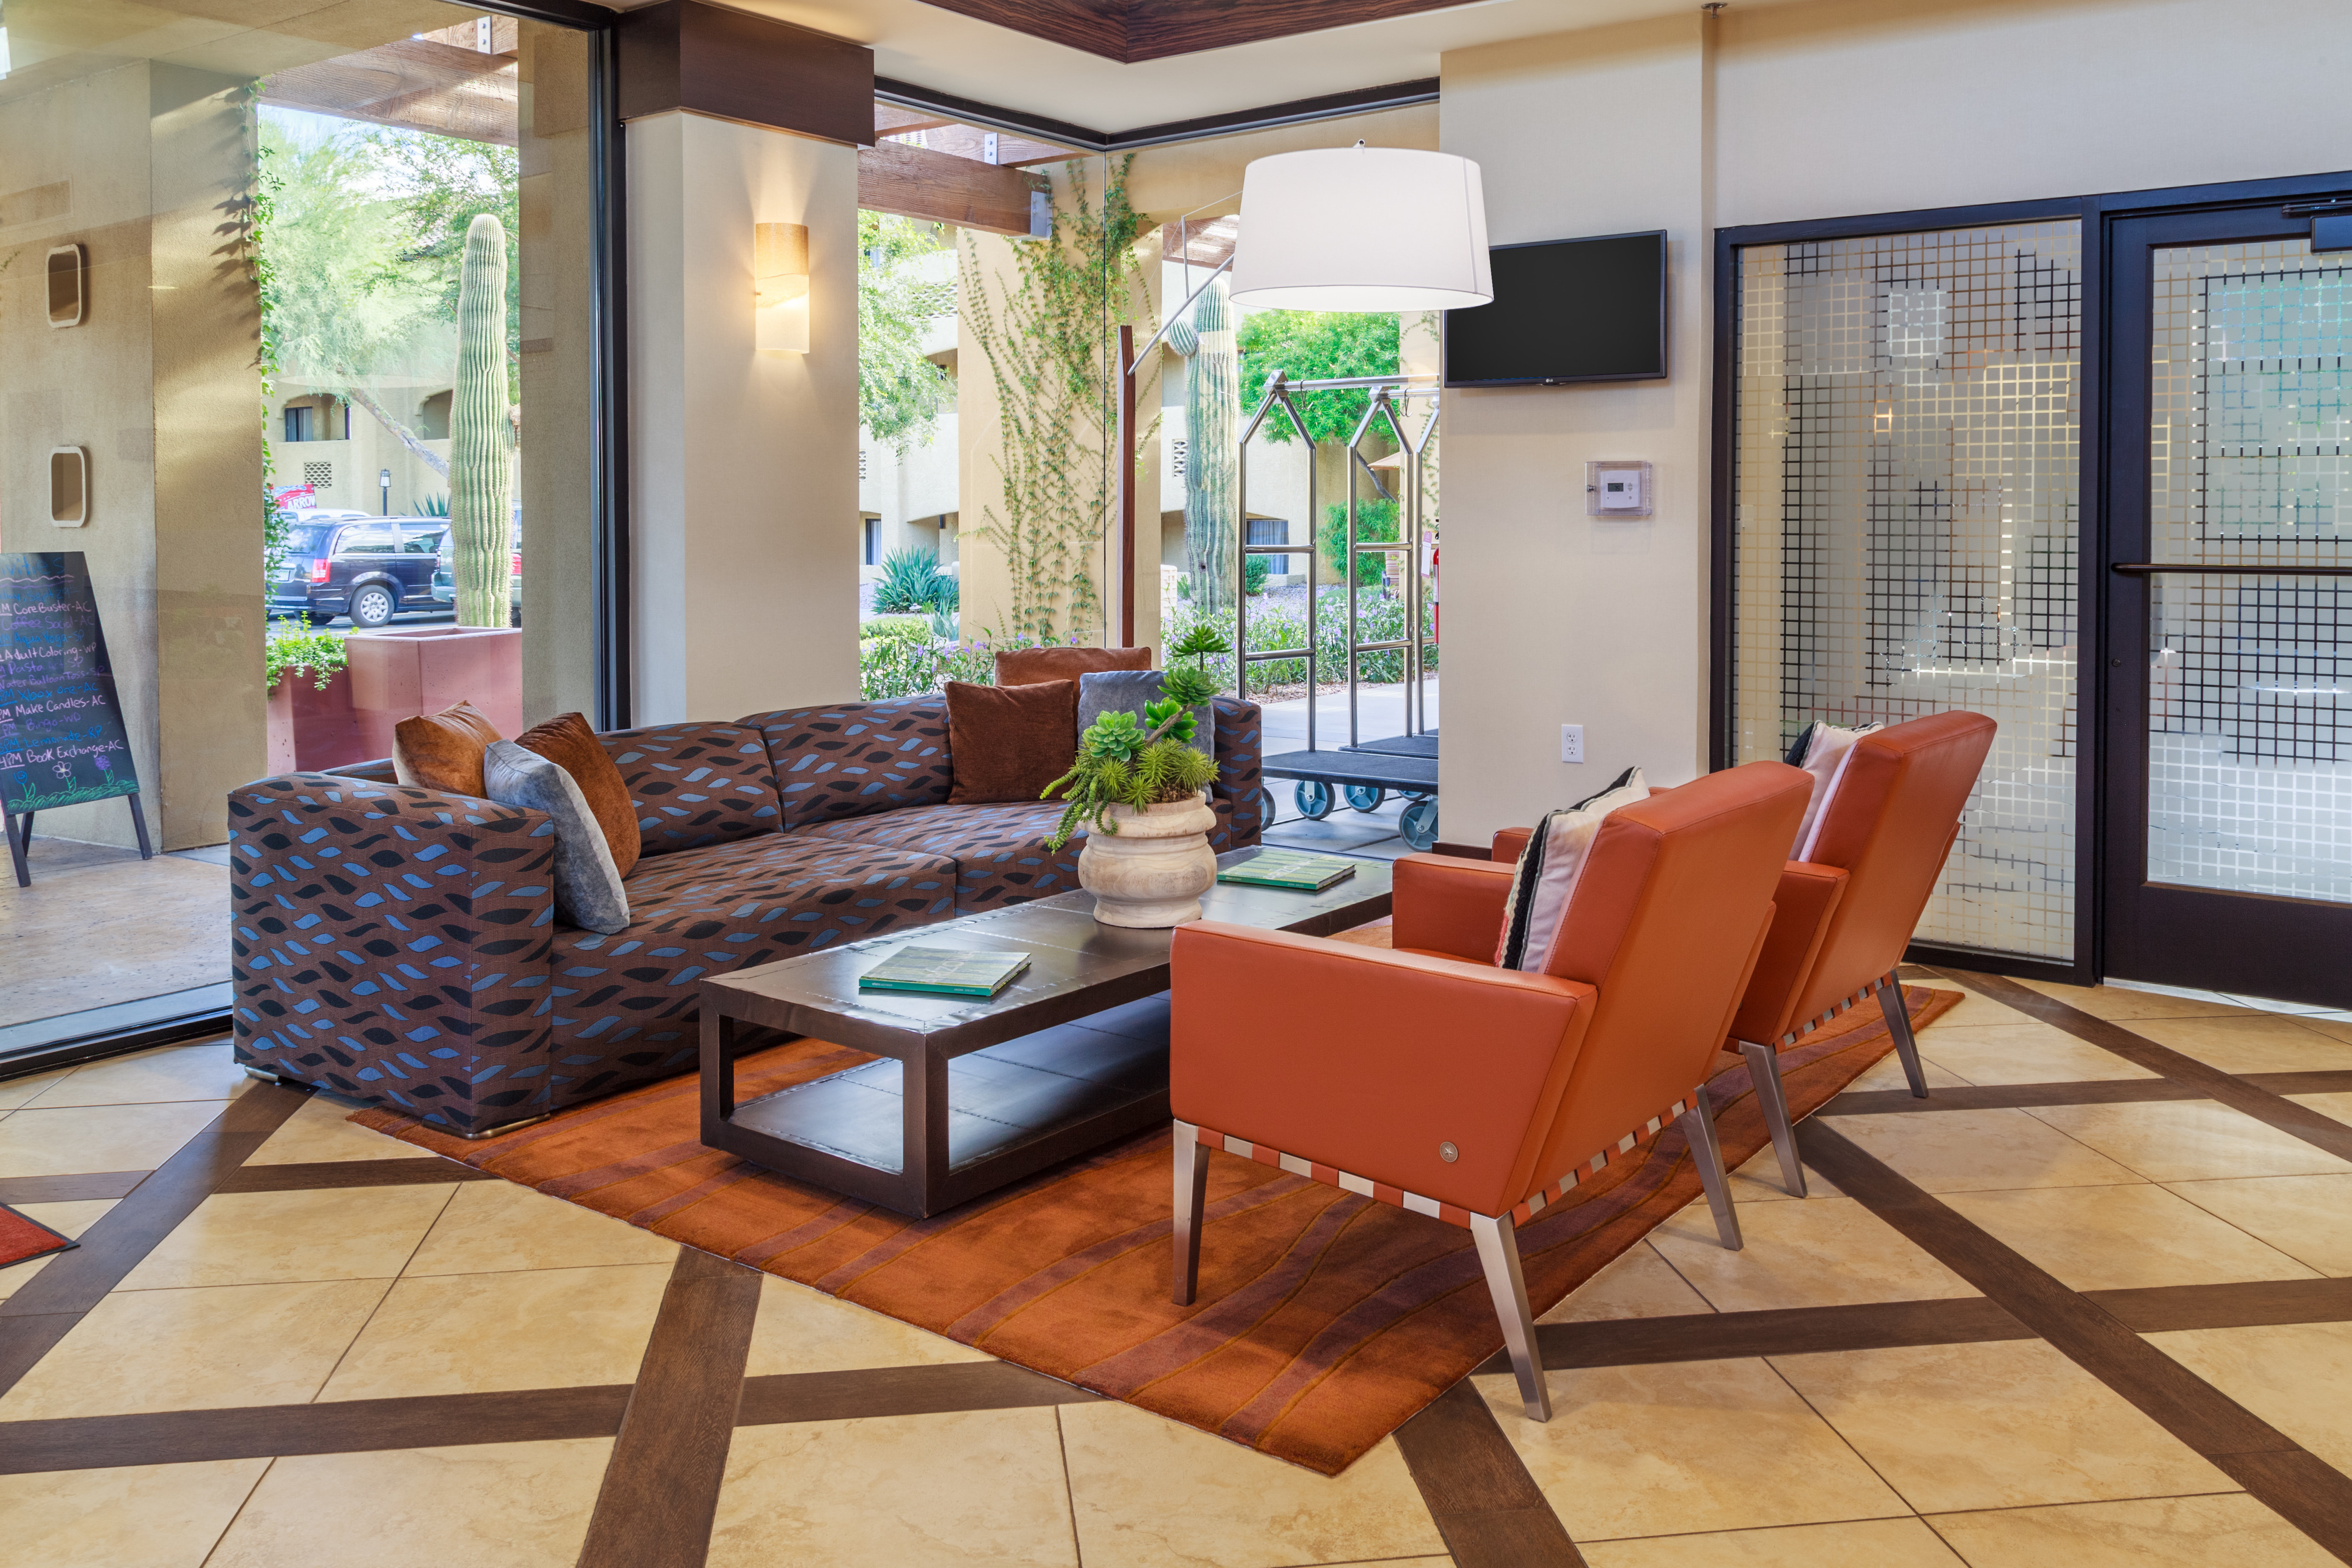 Guests can enjoy relaxing in the lobby of the resort